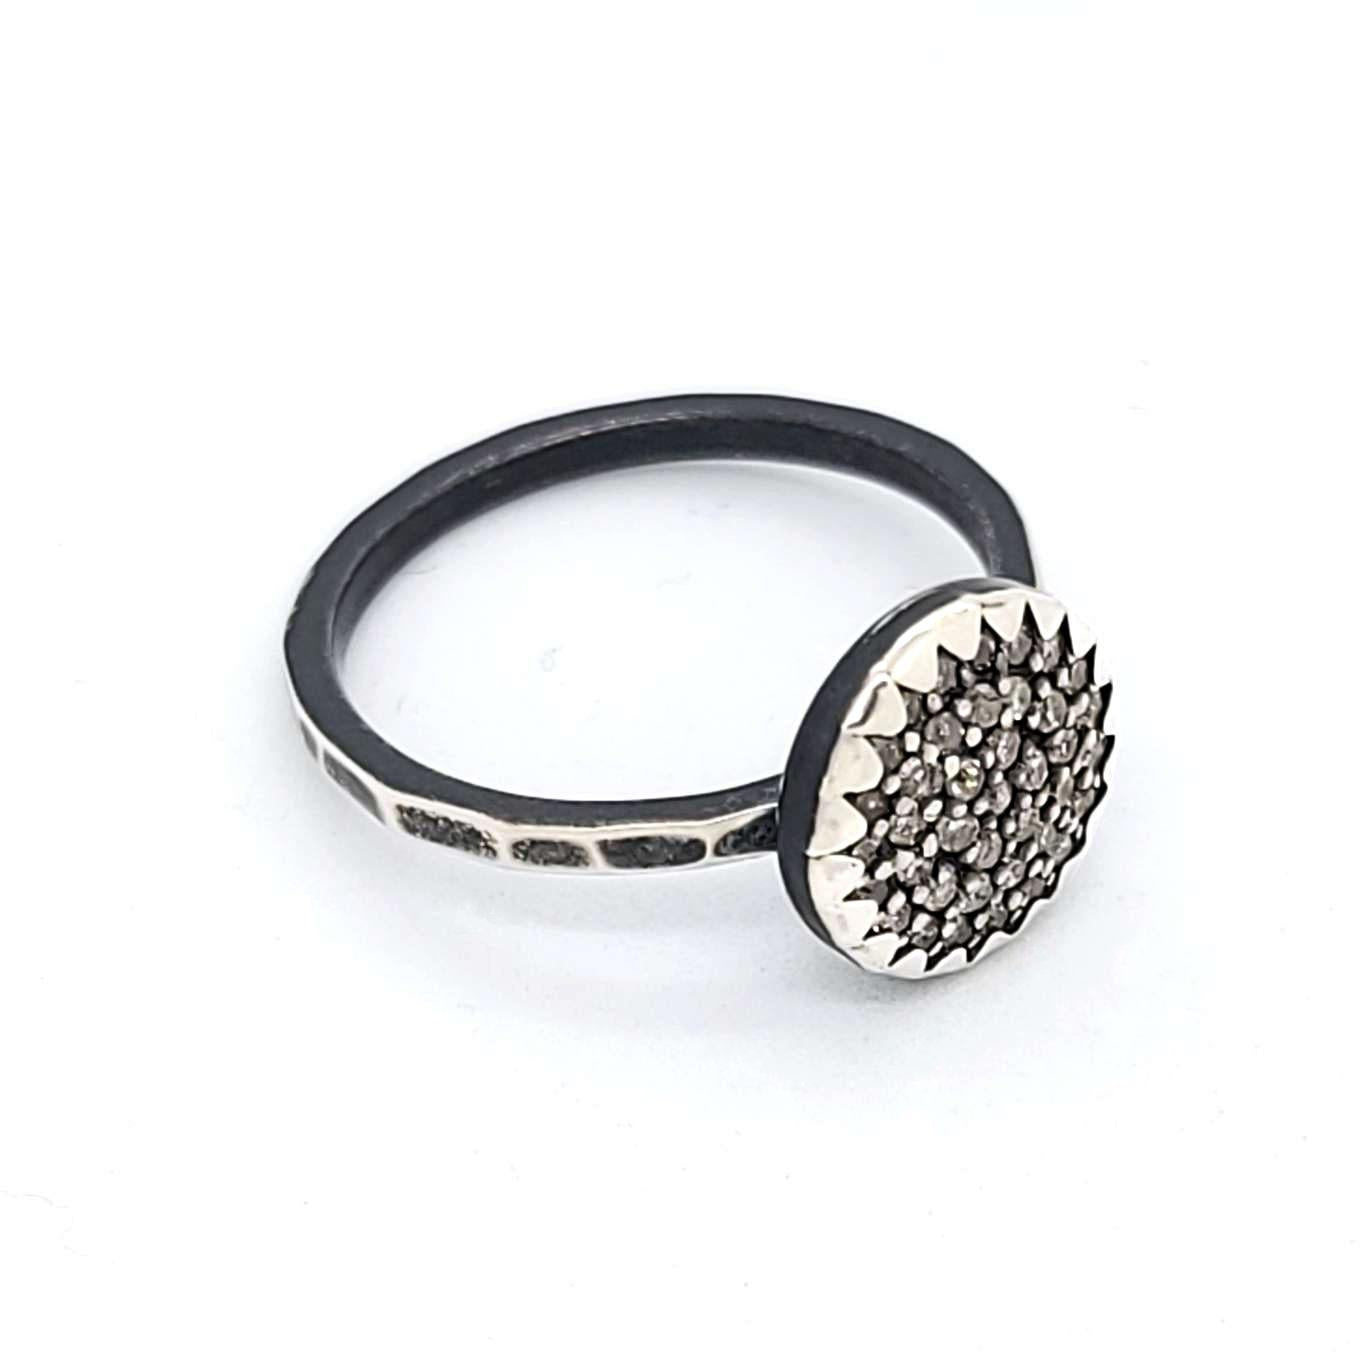 Ring - Size 7 (Custom Sizing Available) - 10mm Pavé Diamond on Hammered Band in Sterling Silver by 314 Studio